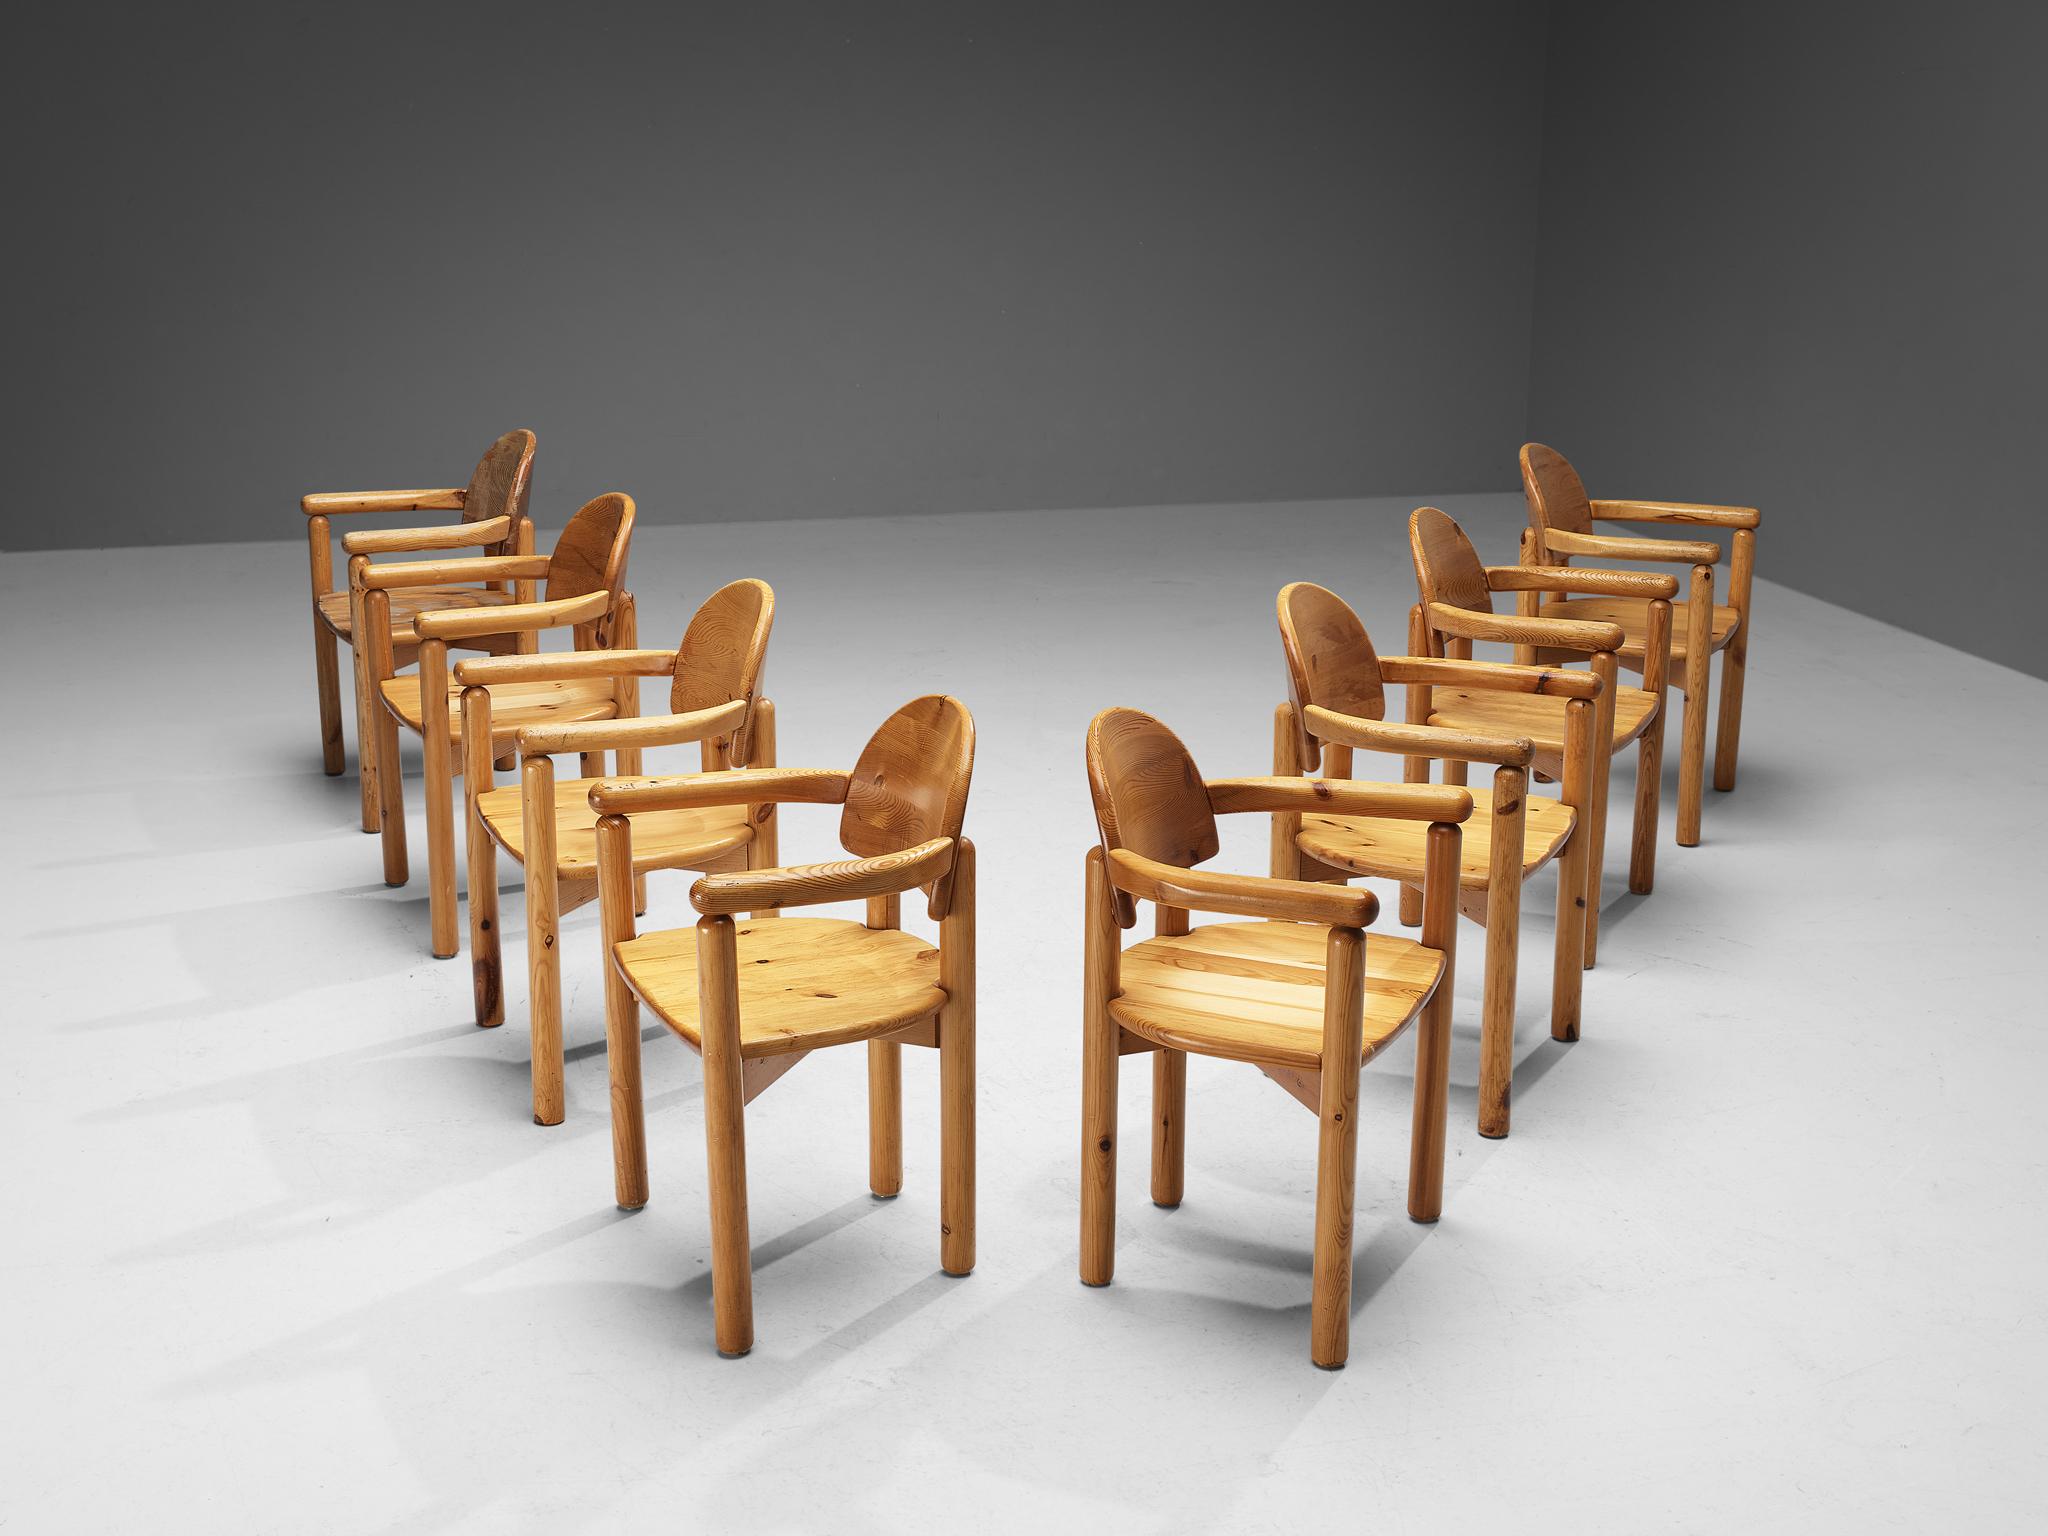 Rainer Daumiller for Hirtshals Sawmill, set of eight dining chairs, pine, Denmark, 1970s

These armchairs by Danish designer Rainer Daumiller have multiple stunning features. The vivid grain of the warm pine wood contributes to the natural